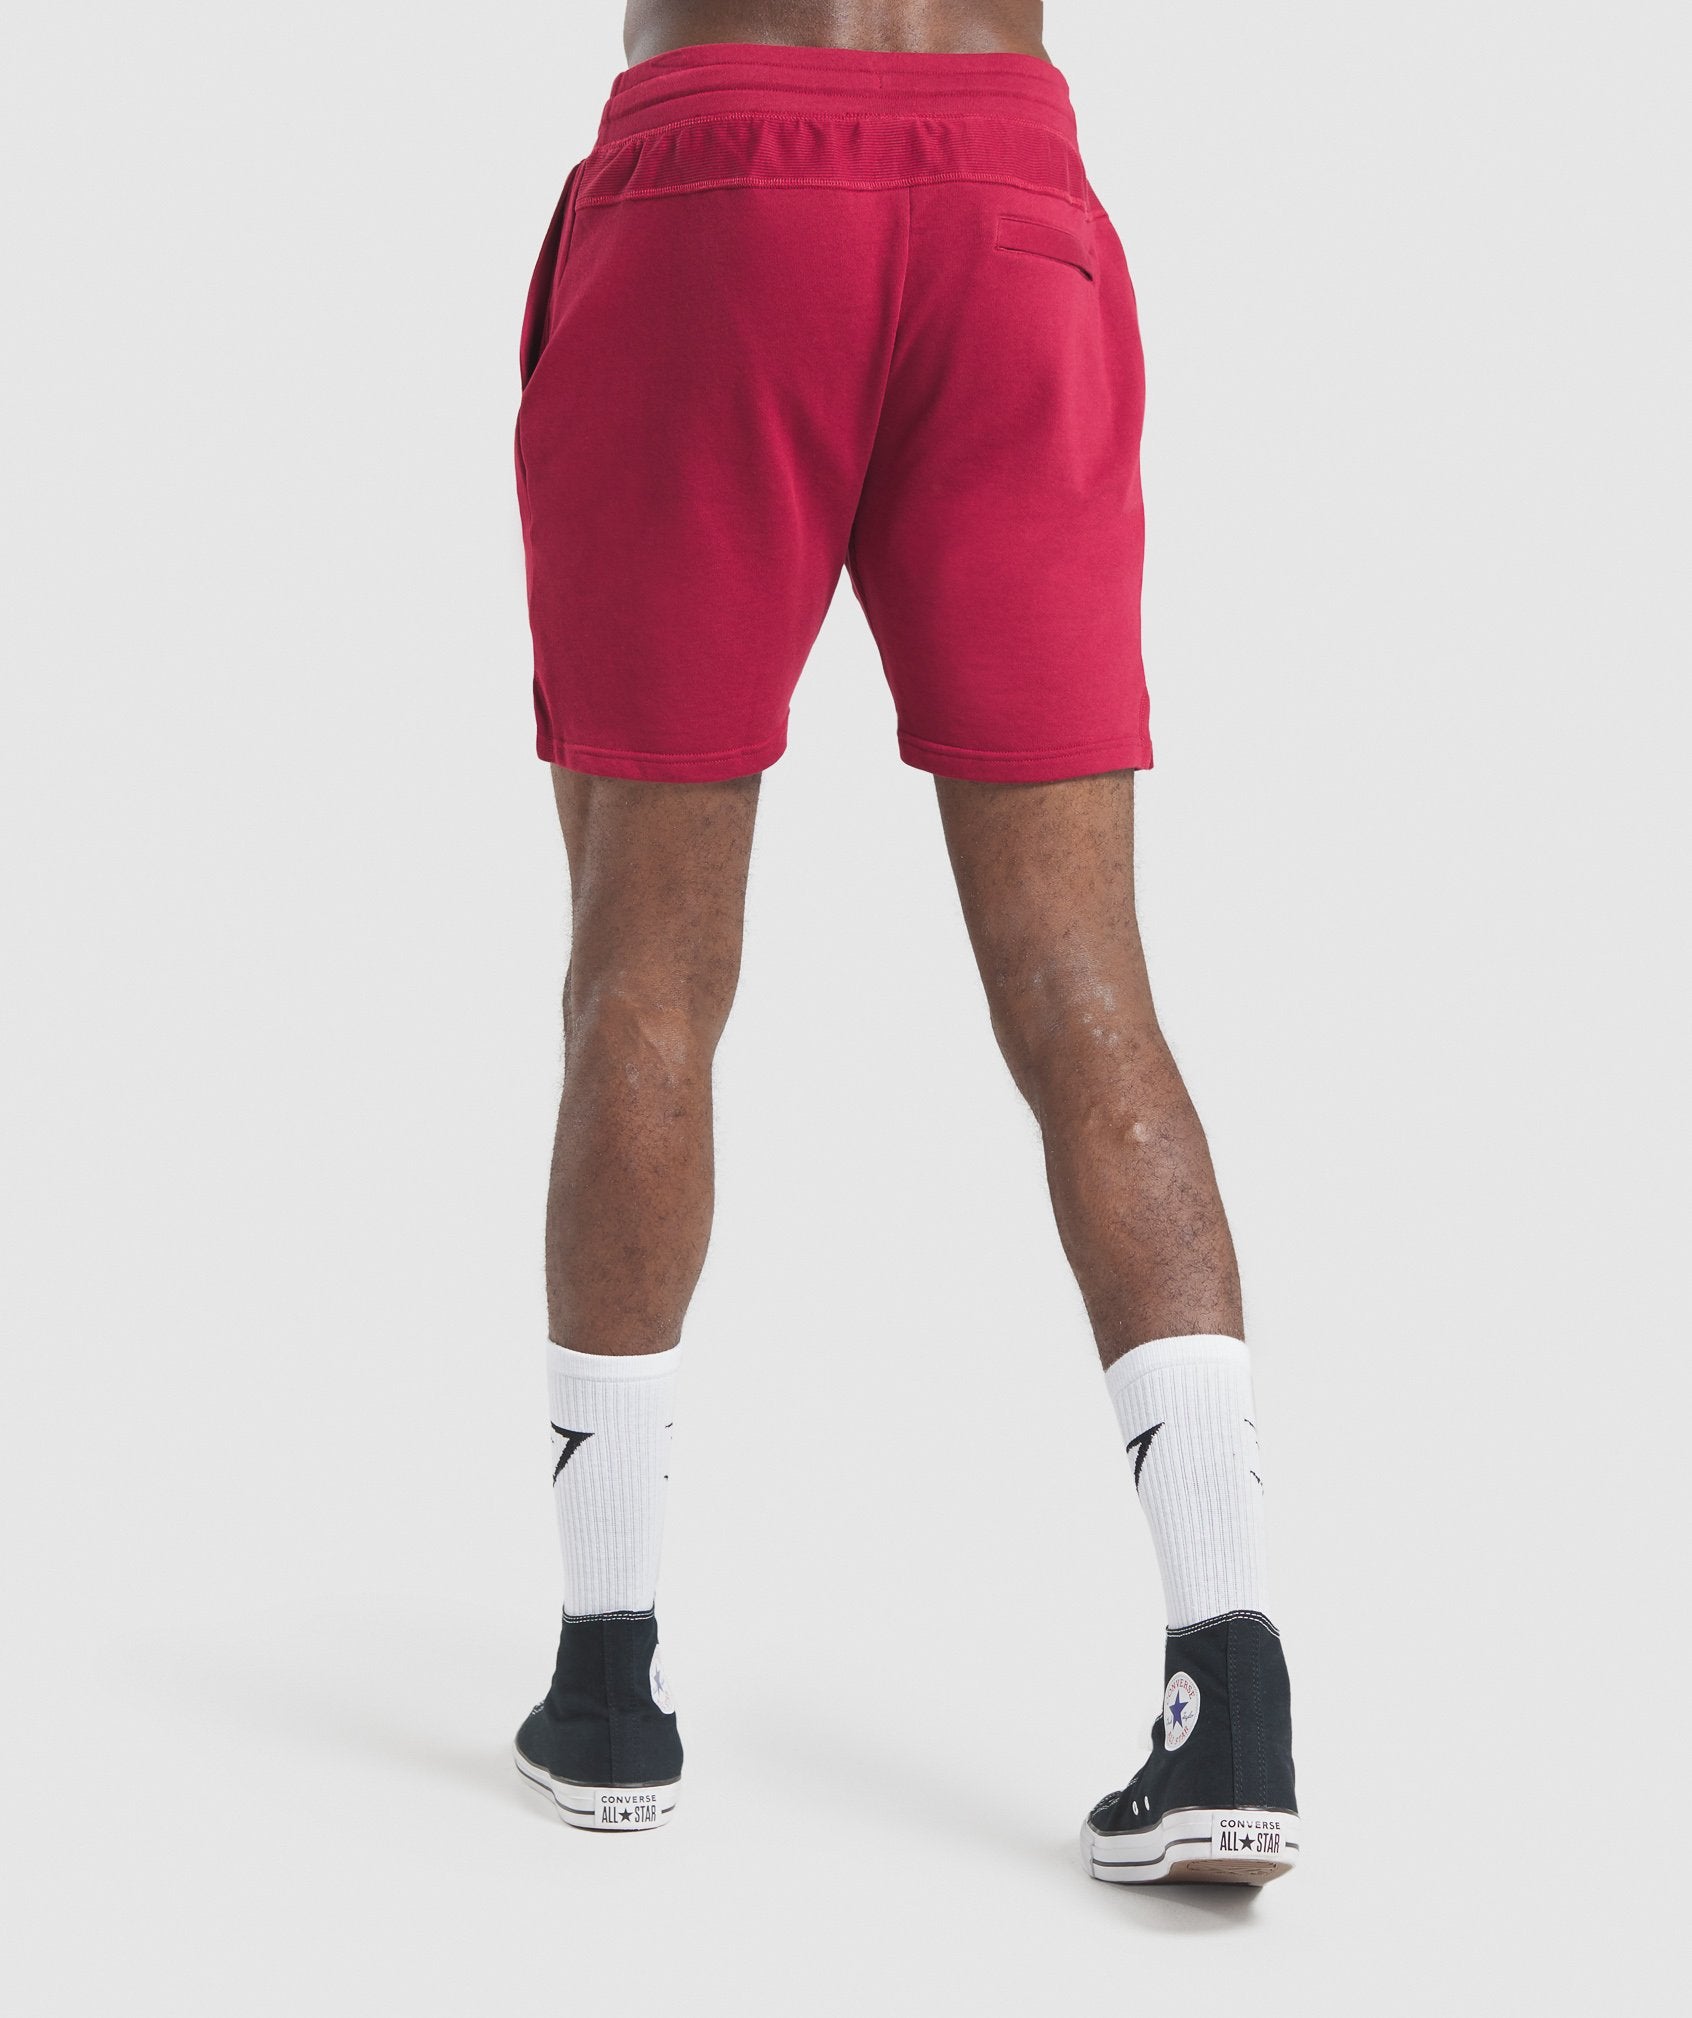 Compound Shorts in Burgundy - view 2